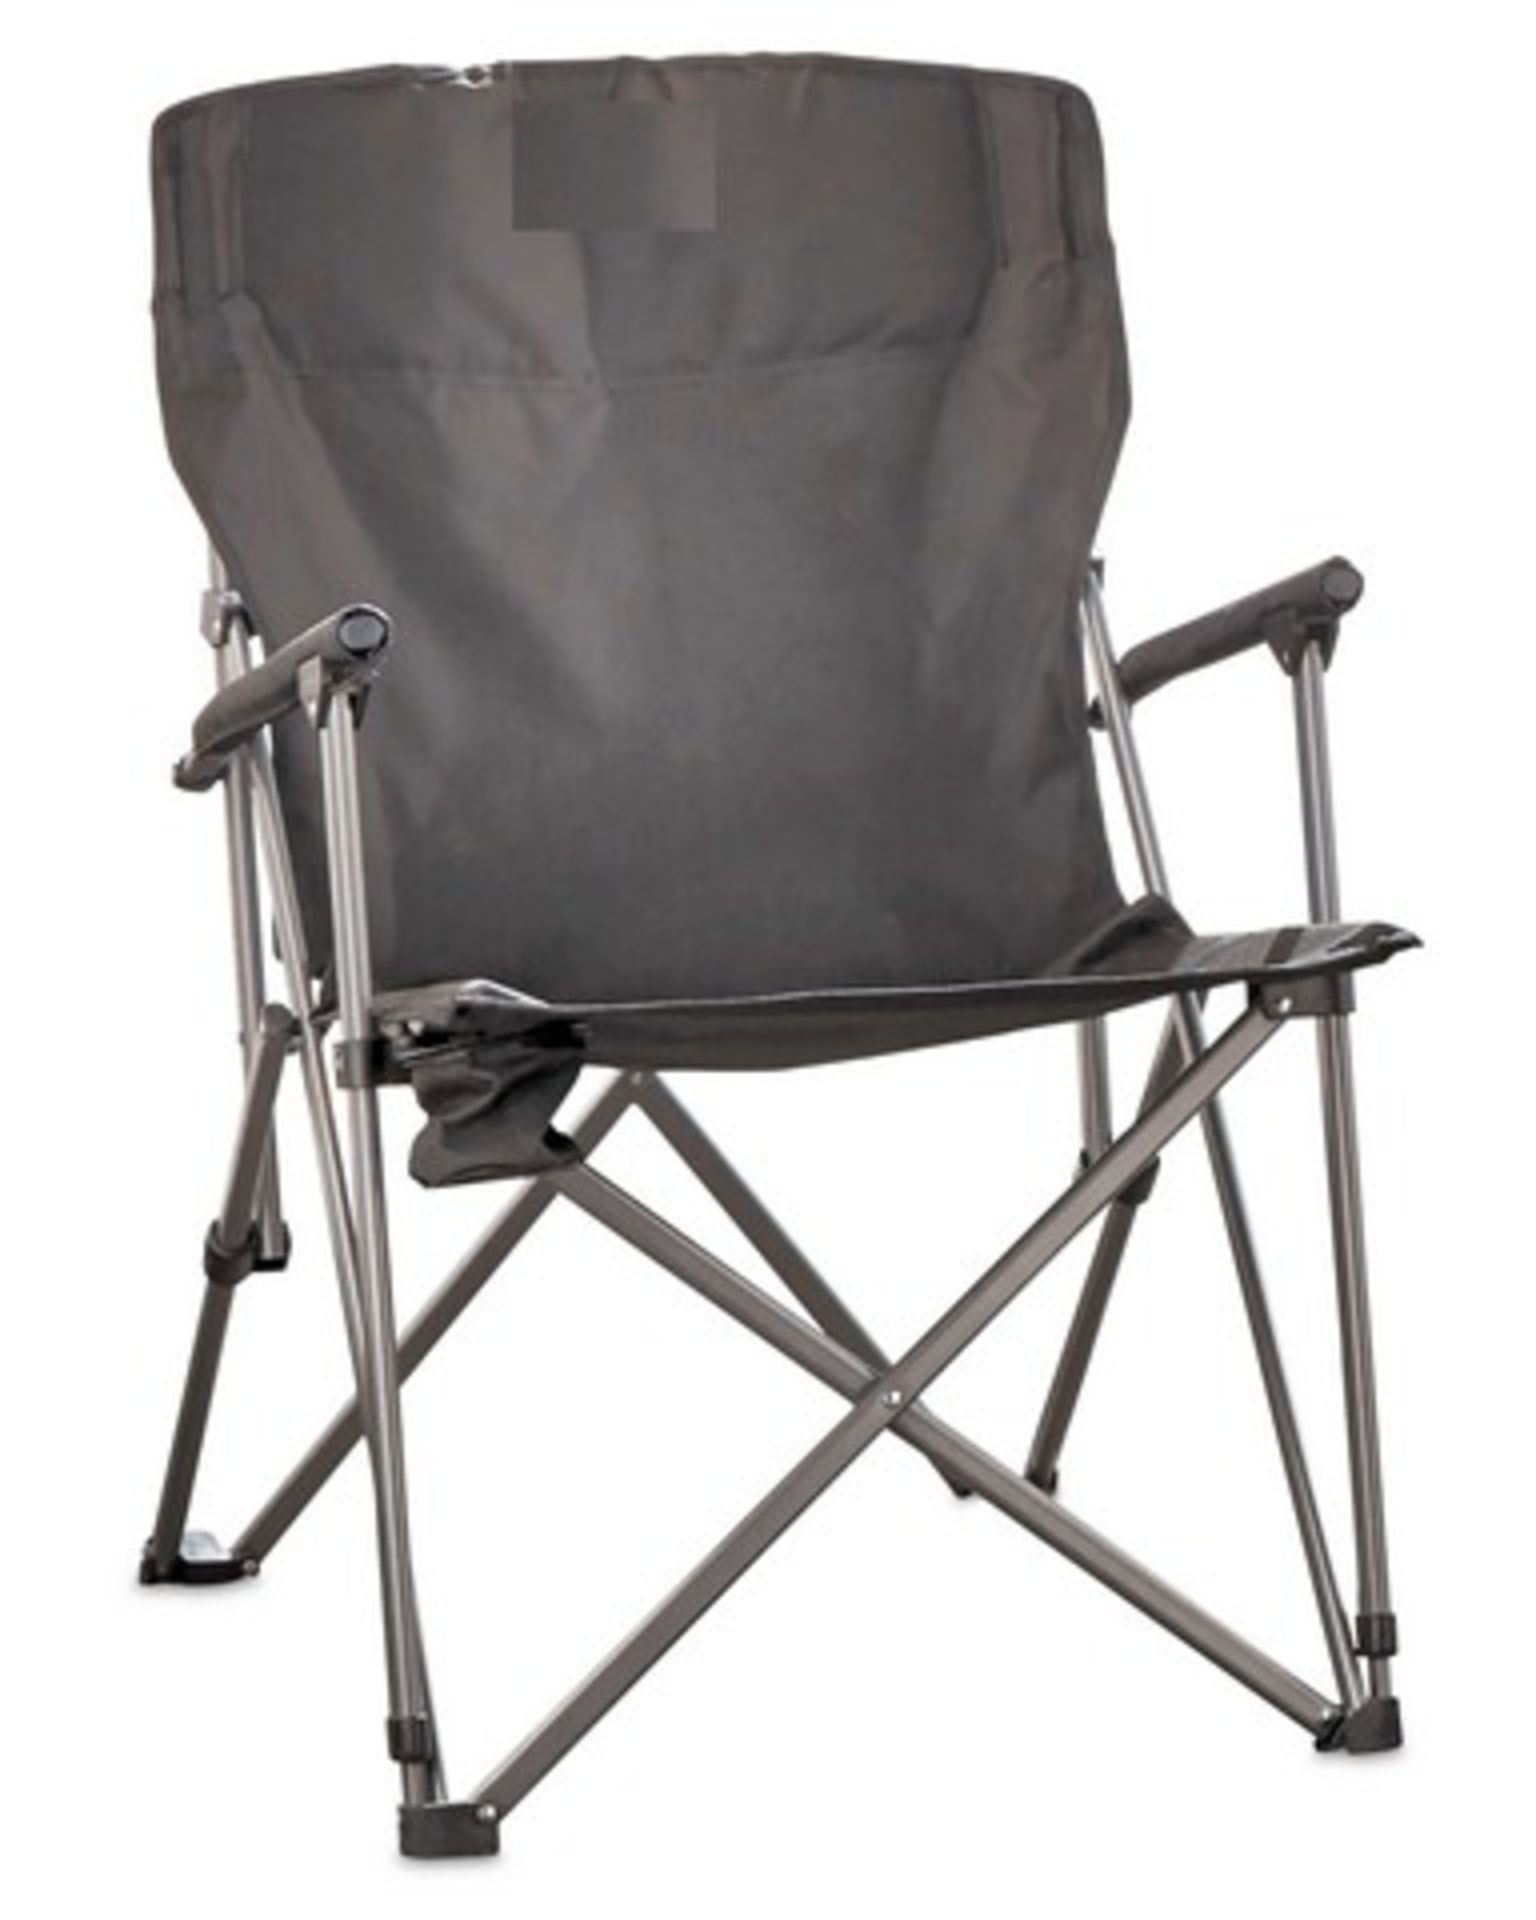 V Brand New Expedition/Tourer Chair In Silver/Black With Carry Case - Lightweight Steel Frame So - Image 3 of 3